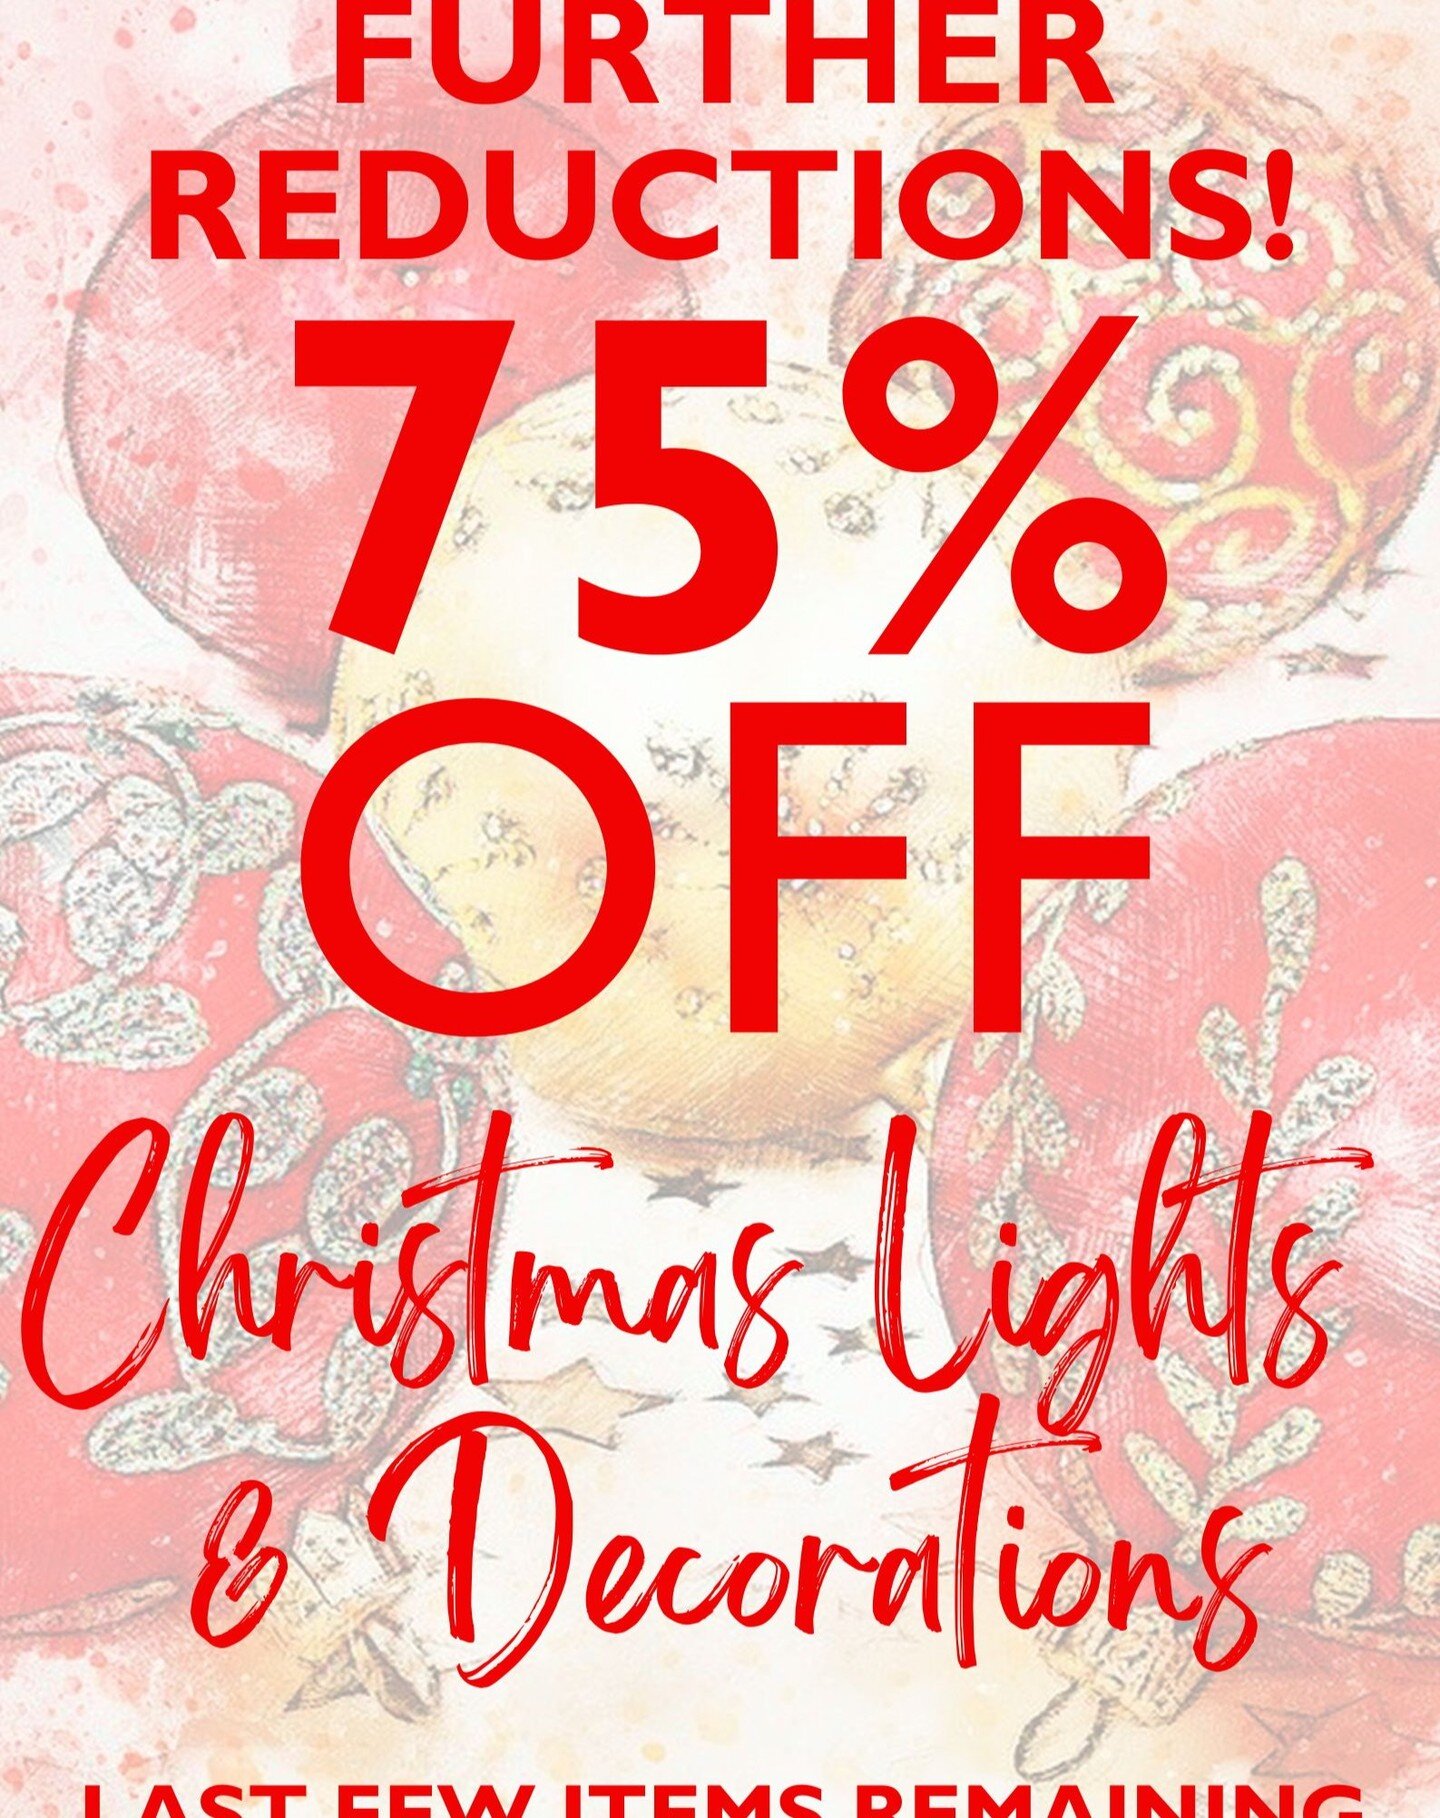 SALE NOW ON at STAVERTON NURSERY! ALL Christmas Lights and Decorations, Cards and Calendars reduced.*

(*discounts vary)